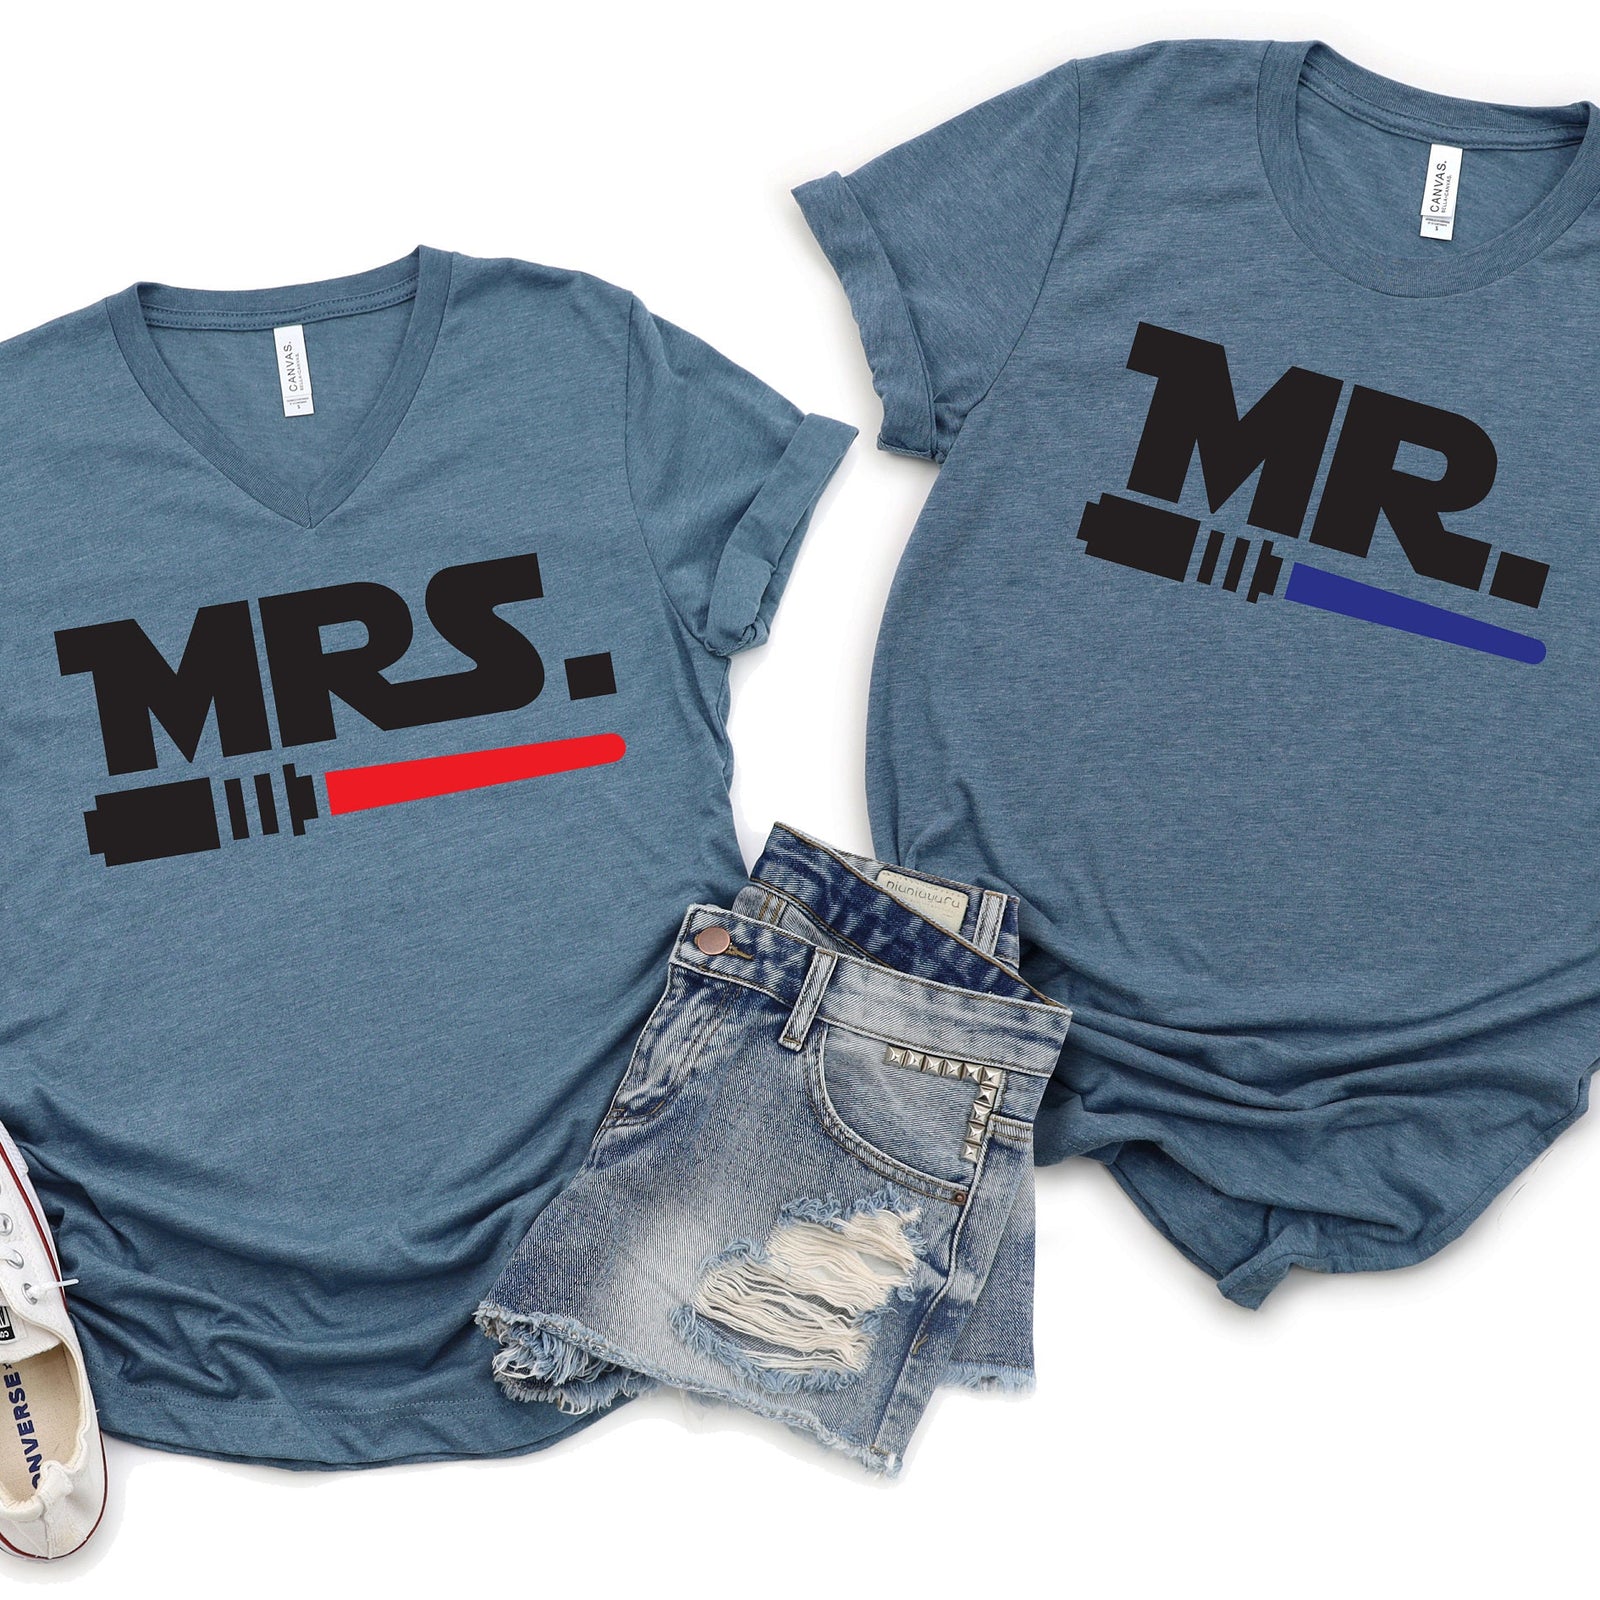 Mr and Mrs Jedi - Adult Star Wars Unisex T Shirts - Disney Couples Matching Shirts - Just Married - Light Saber - Honeymoon